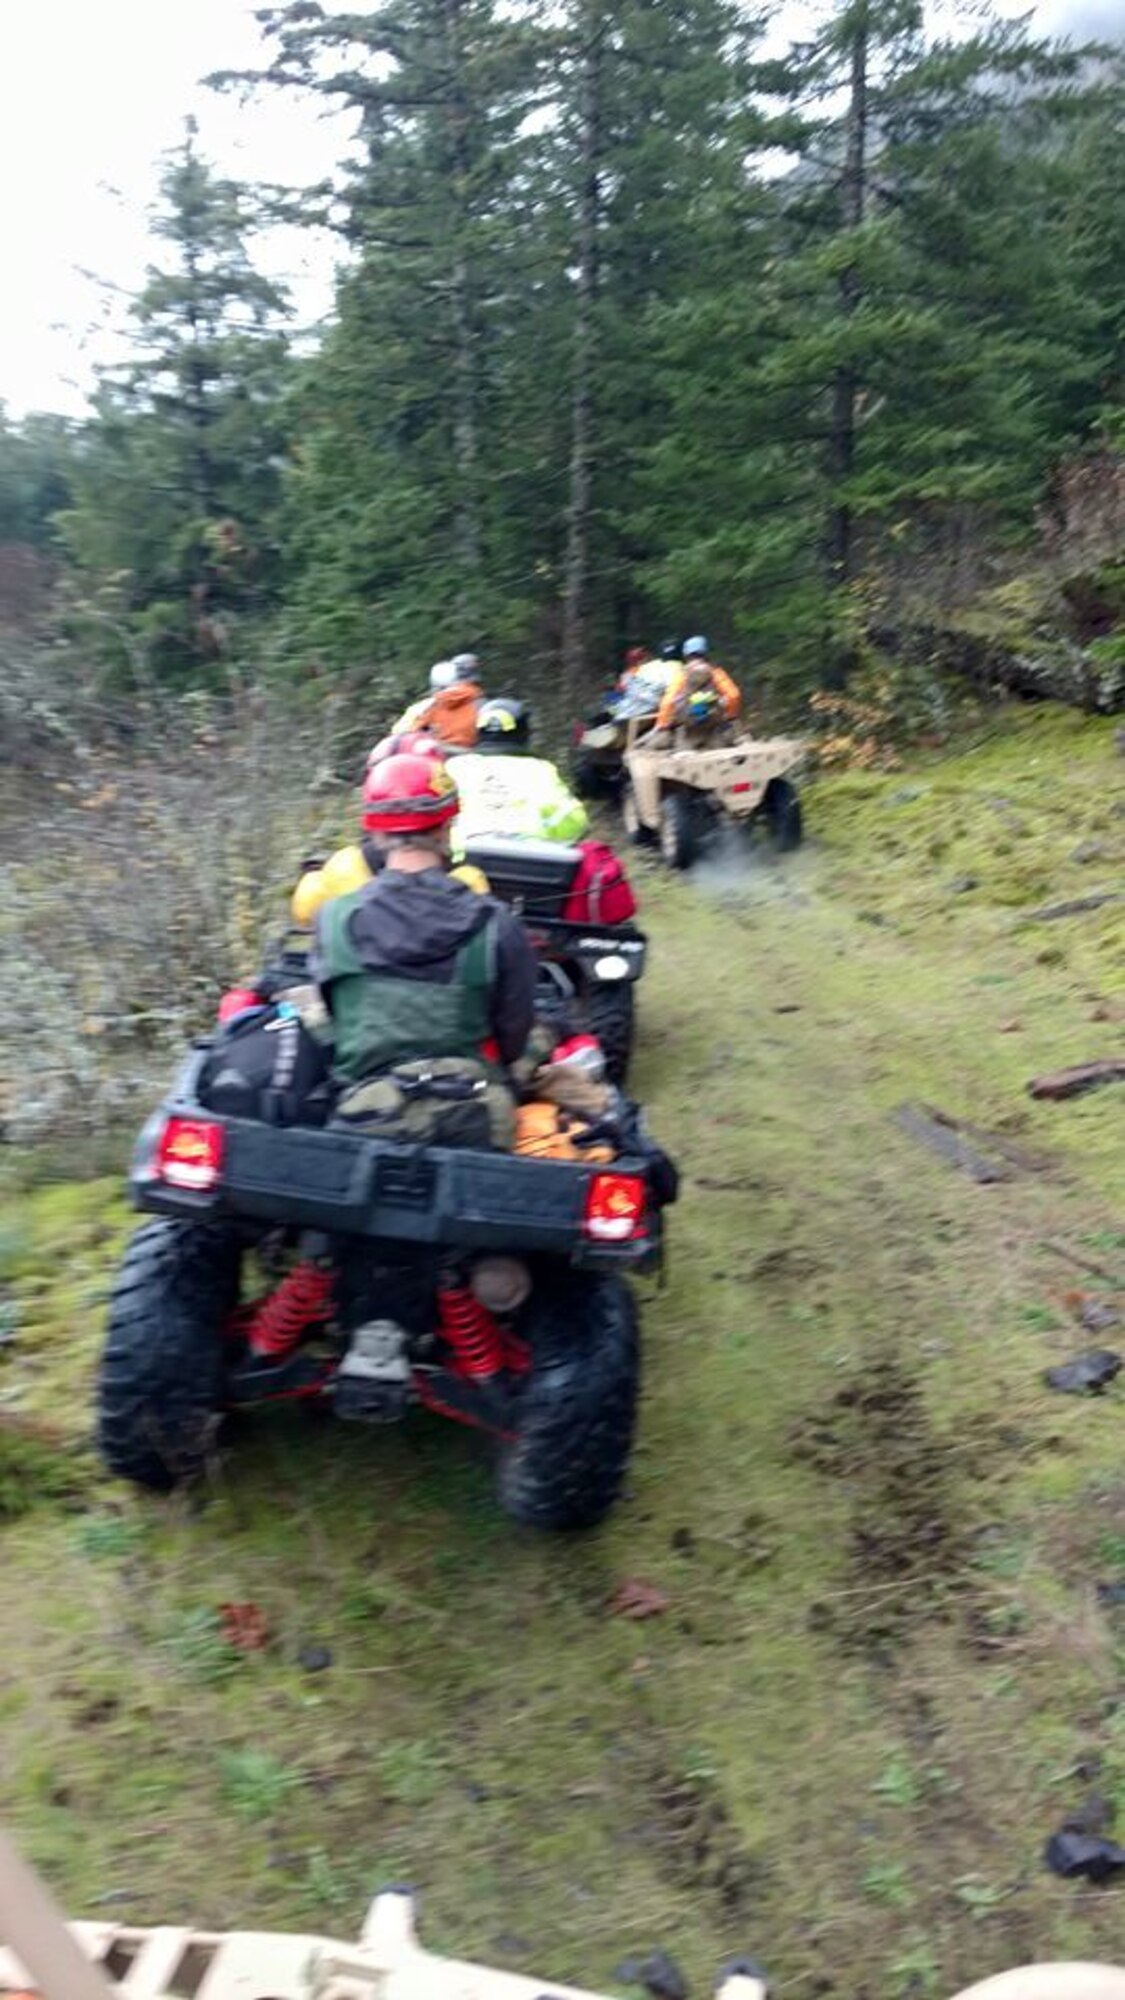 Air Force Reserve Pararescuemen or PJs from Portland’s 304th Rescue Squadron assisted in recovering a hiker who was declared missing October 25, 2016. Early October 26, 2016, a team of four PJs scoured steep rocky terrain near the Oregon-Washington border until nightfall with the assistance of volunteers, civil search and rescue teams, AT&T and Apple. Information was obtained to pinpoint the GPS coordinates for the victim, 31-year-old Melvin Burtch's, cell phone allowing searchers to navigate to the cell phone location. They found Burtch’s body within 50 yards of the location of the phone. (U.S. Air Force photo/ Maj. Chris Bernard)
